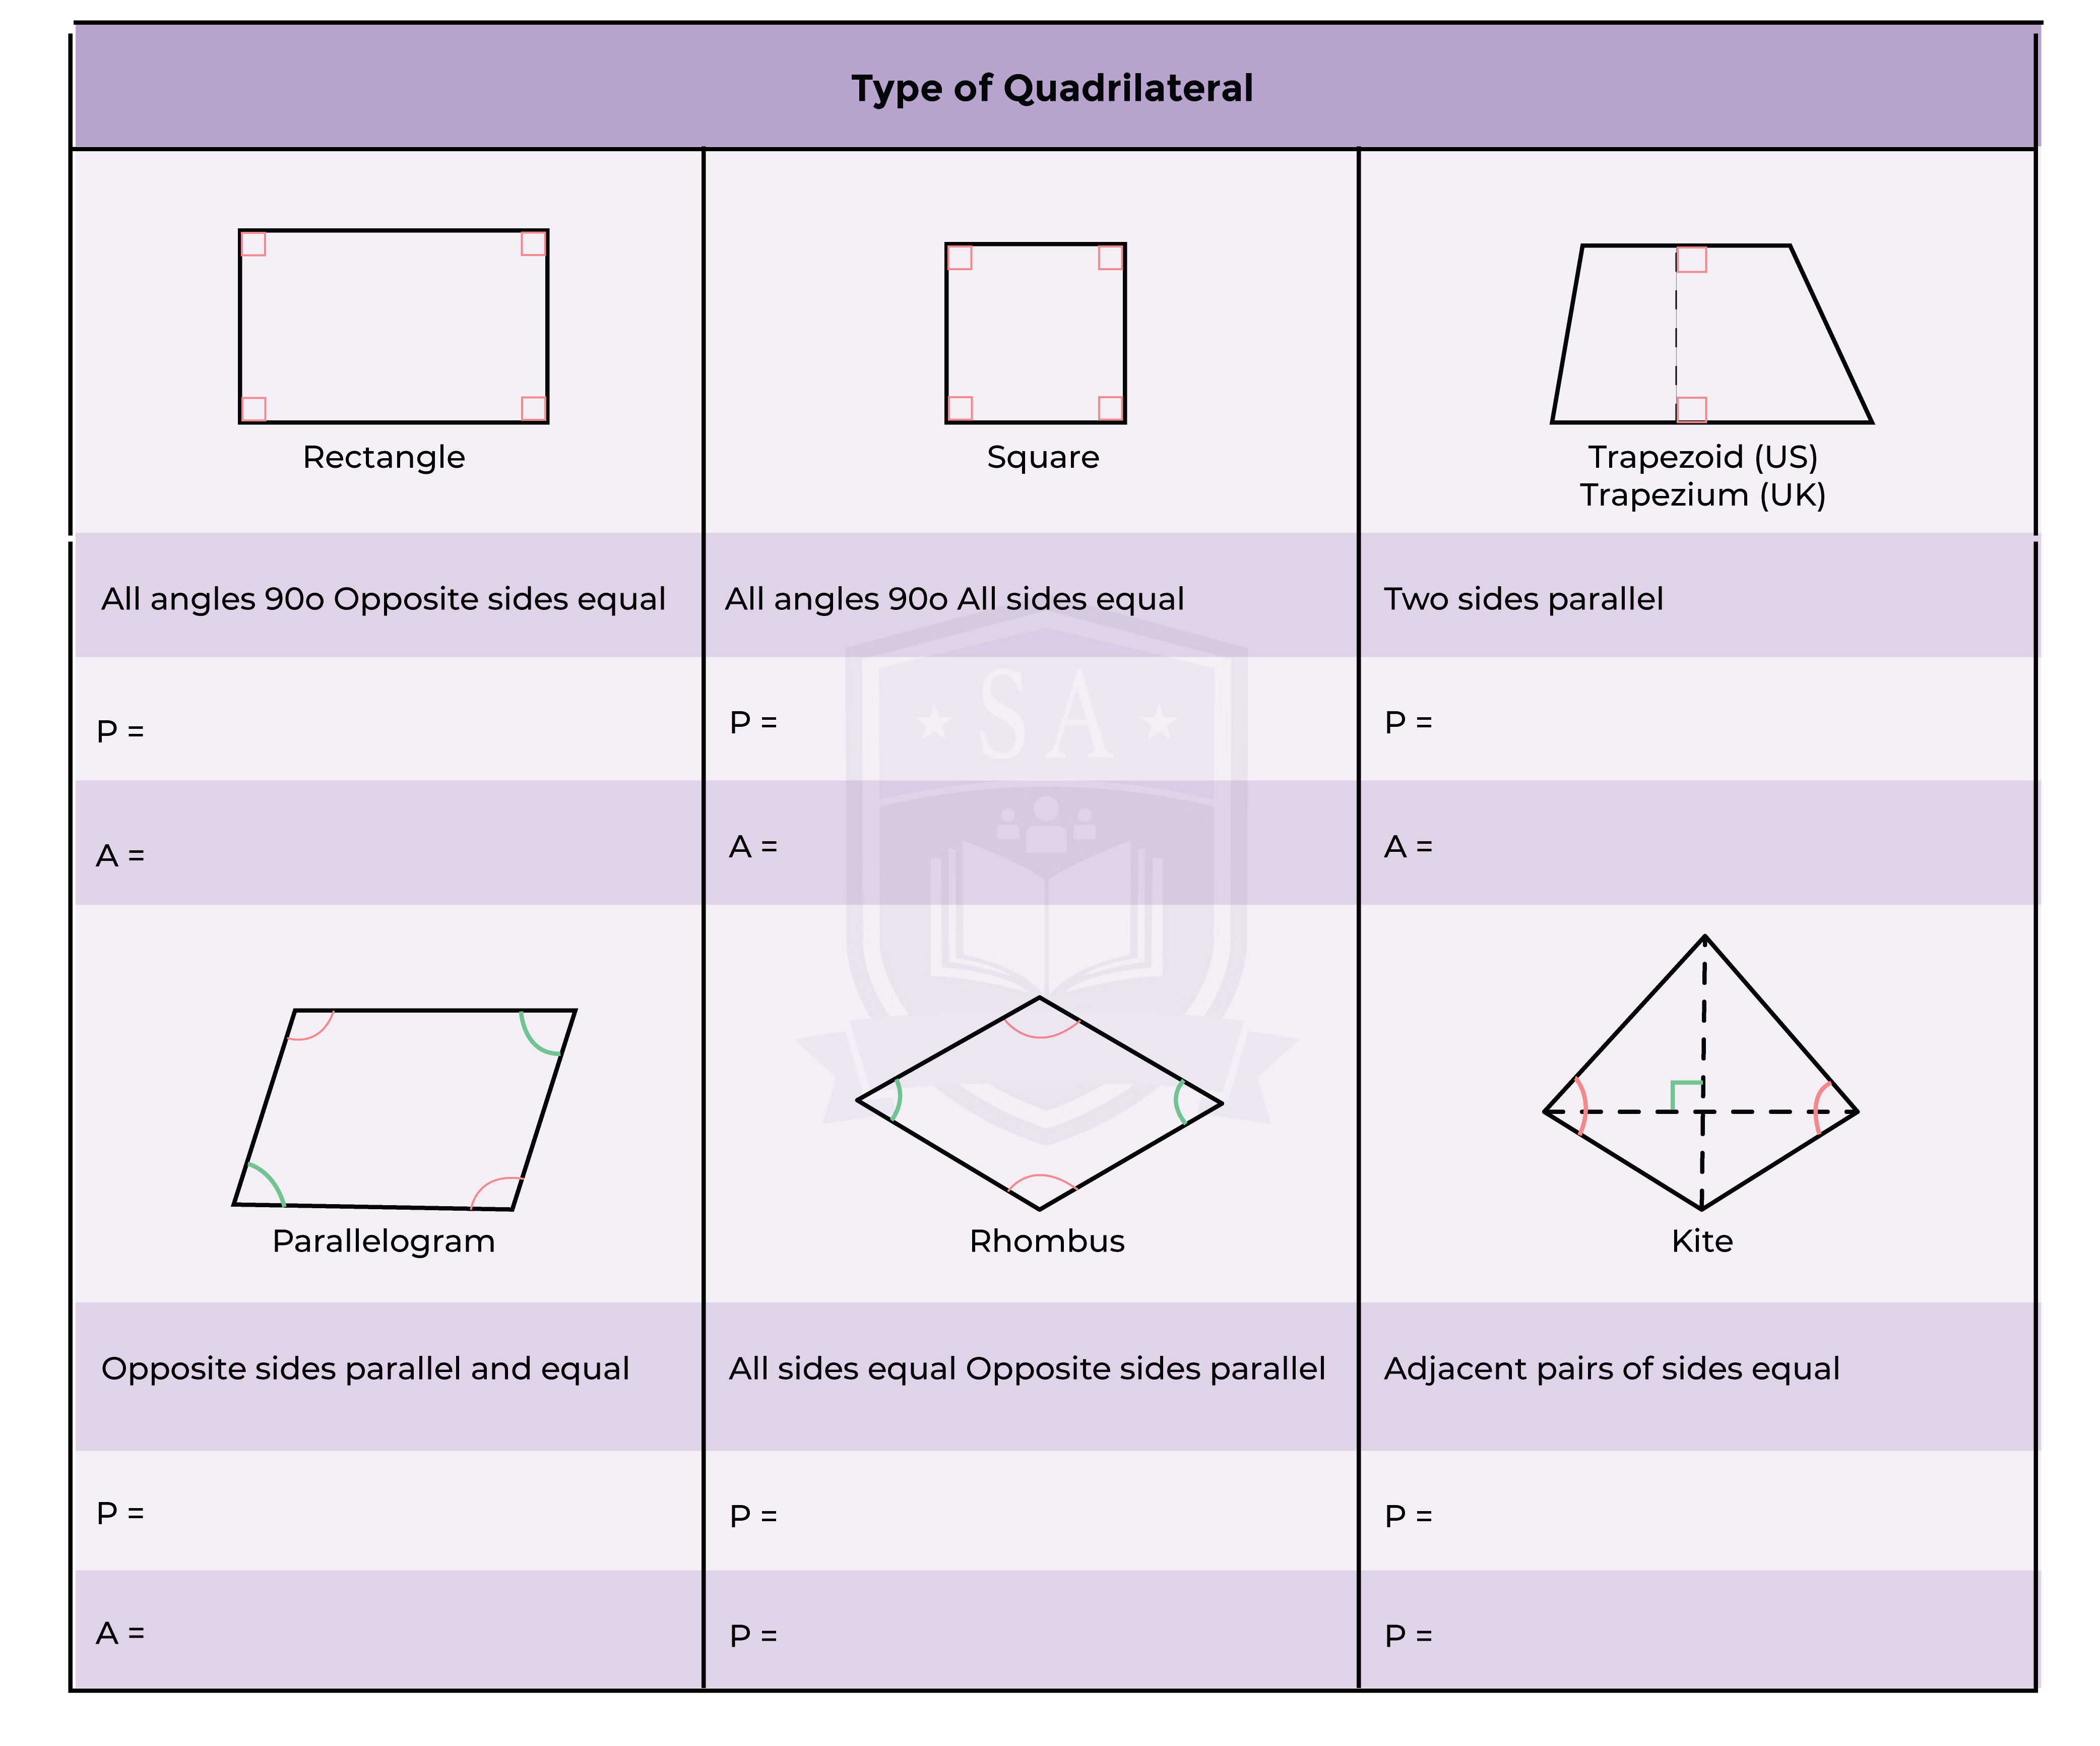 edexcel_igcse_mathematics a_topic 26_polygons_004_Types of Quadrilateral.png